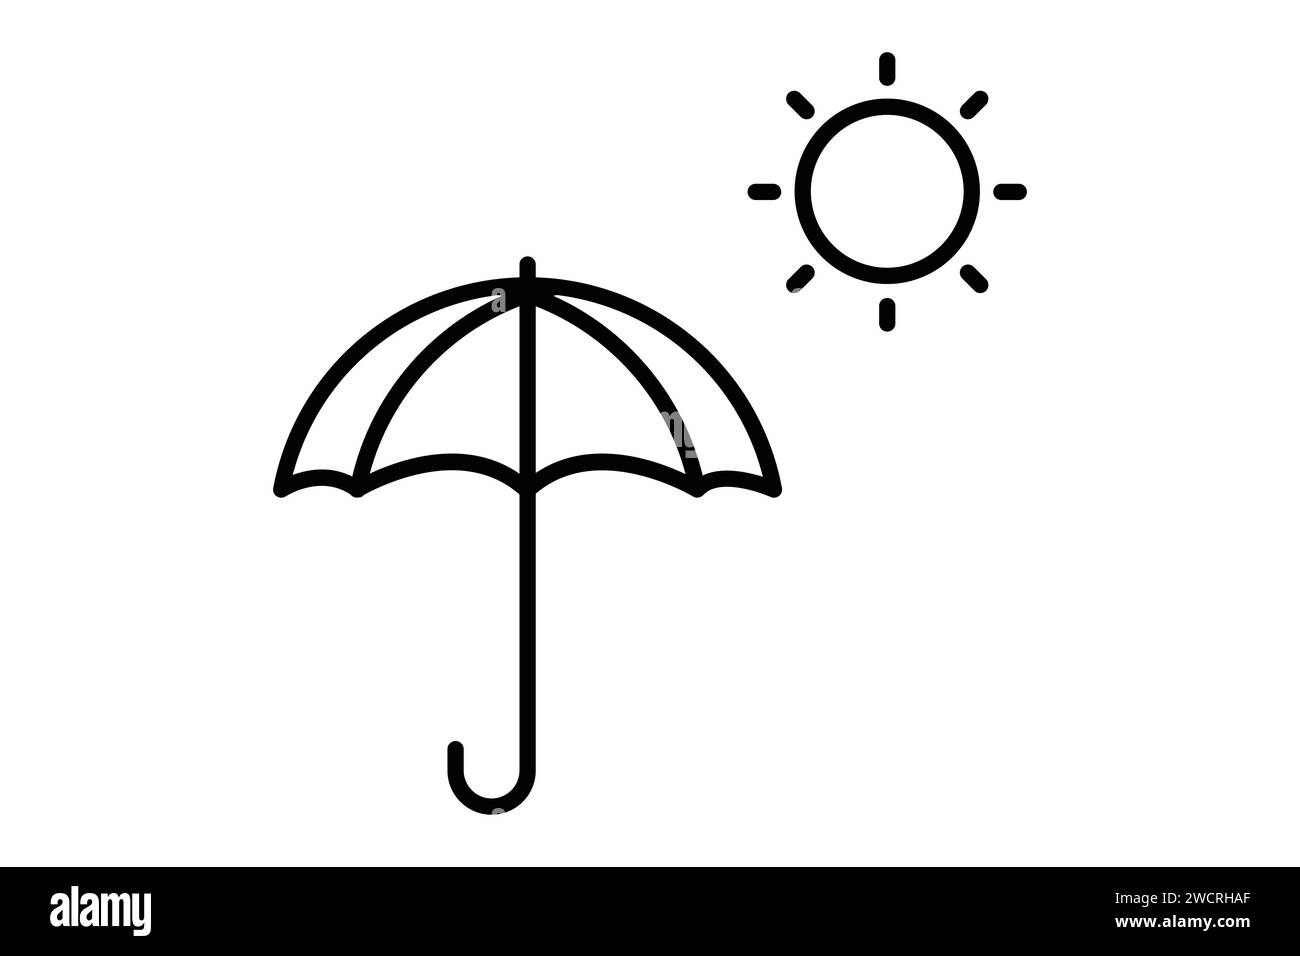 Sun and umbrella icon. icon related to sun protection and relaxation. line icon style. element illustration Stock Vector